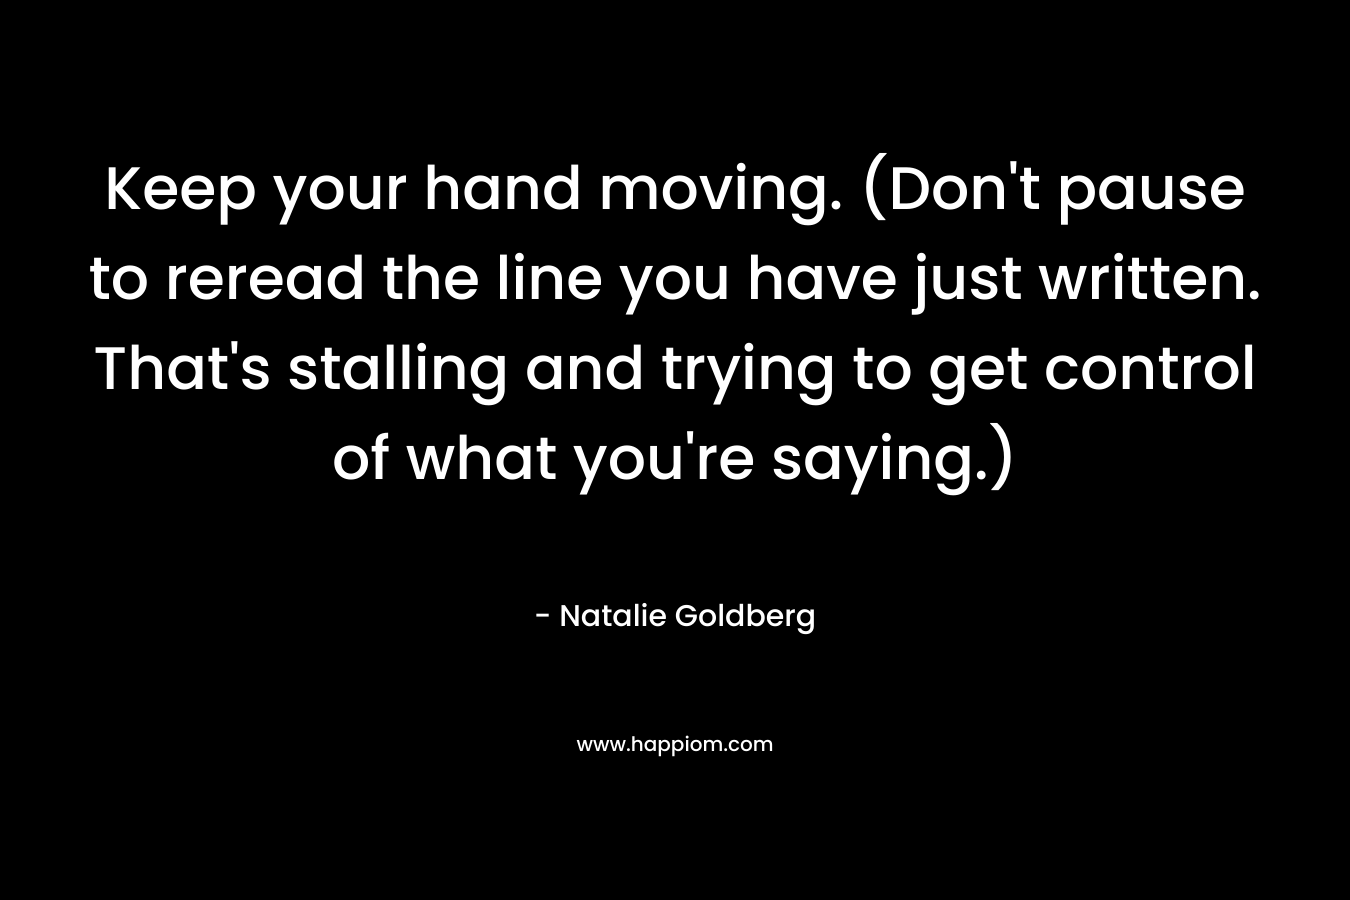 Keep your hand moving. (Don't pause to reread the line you have just written. That's stalling and trying to get control of what you're saying.)